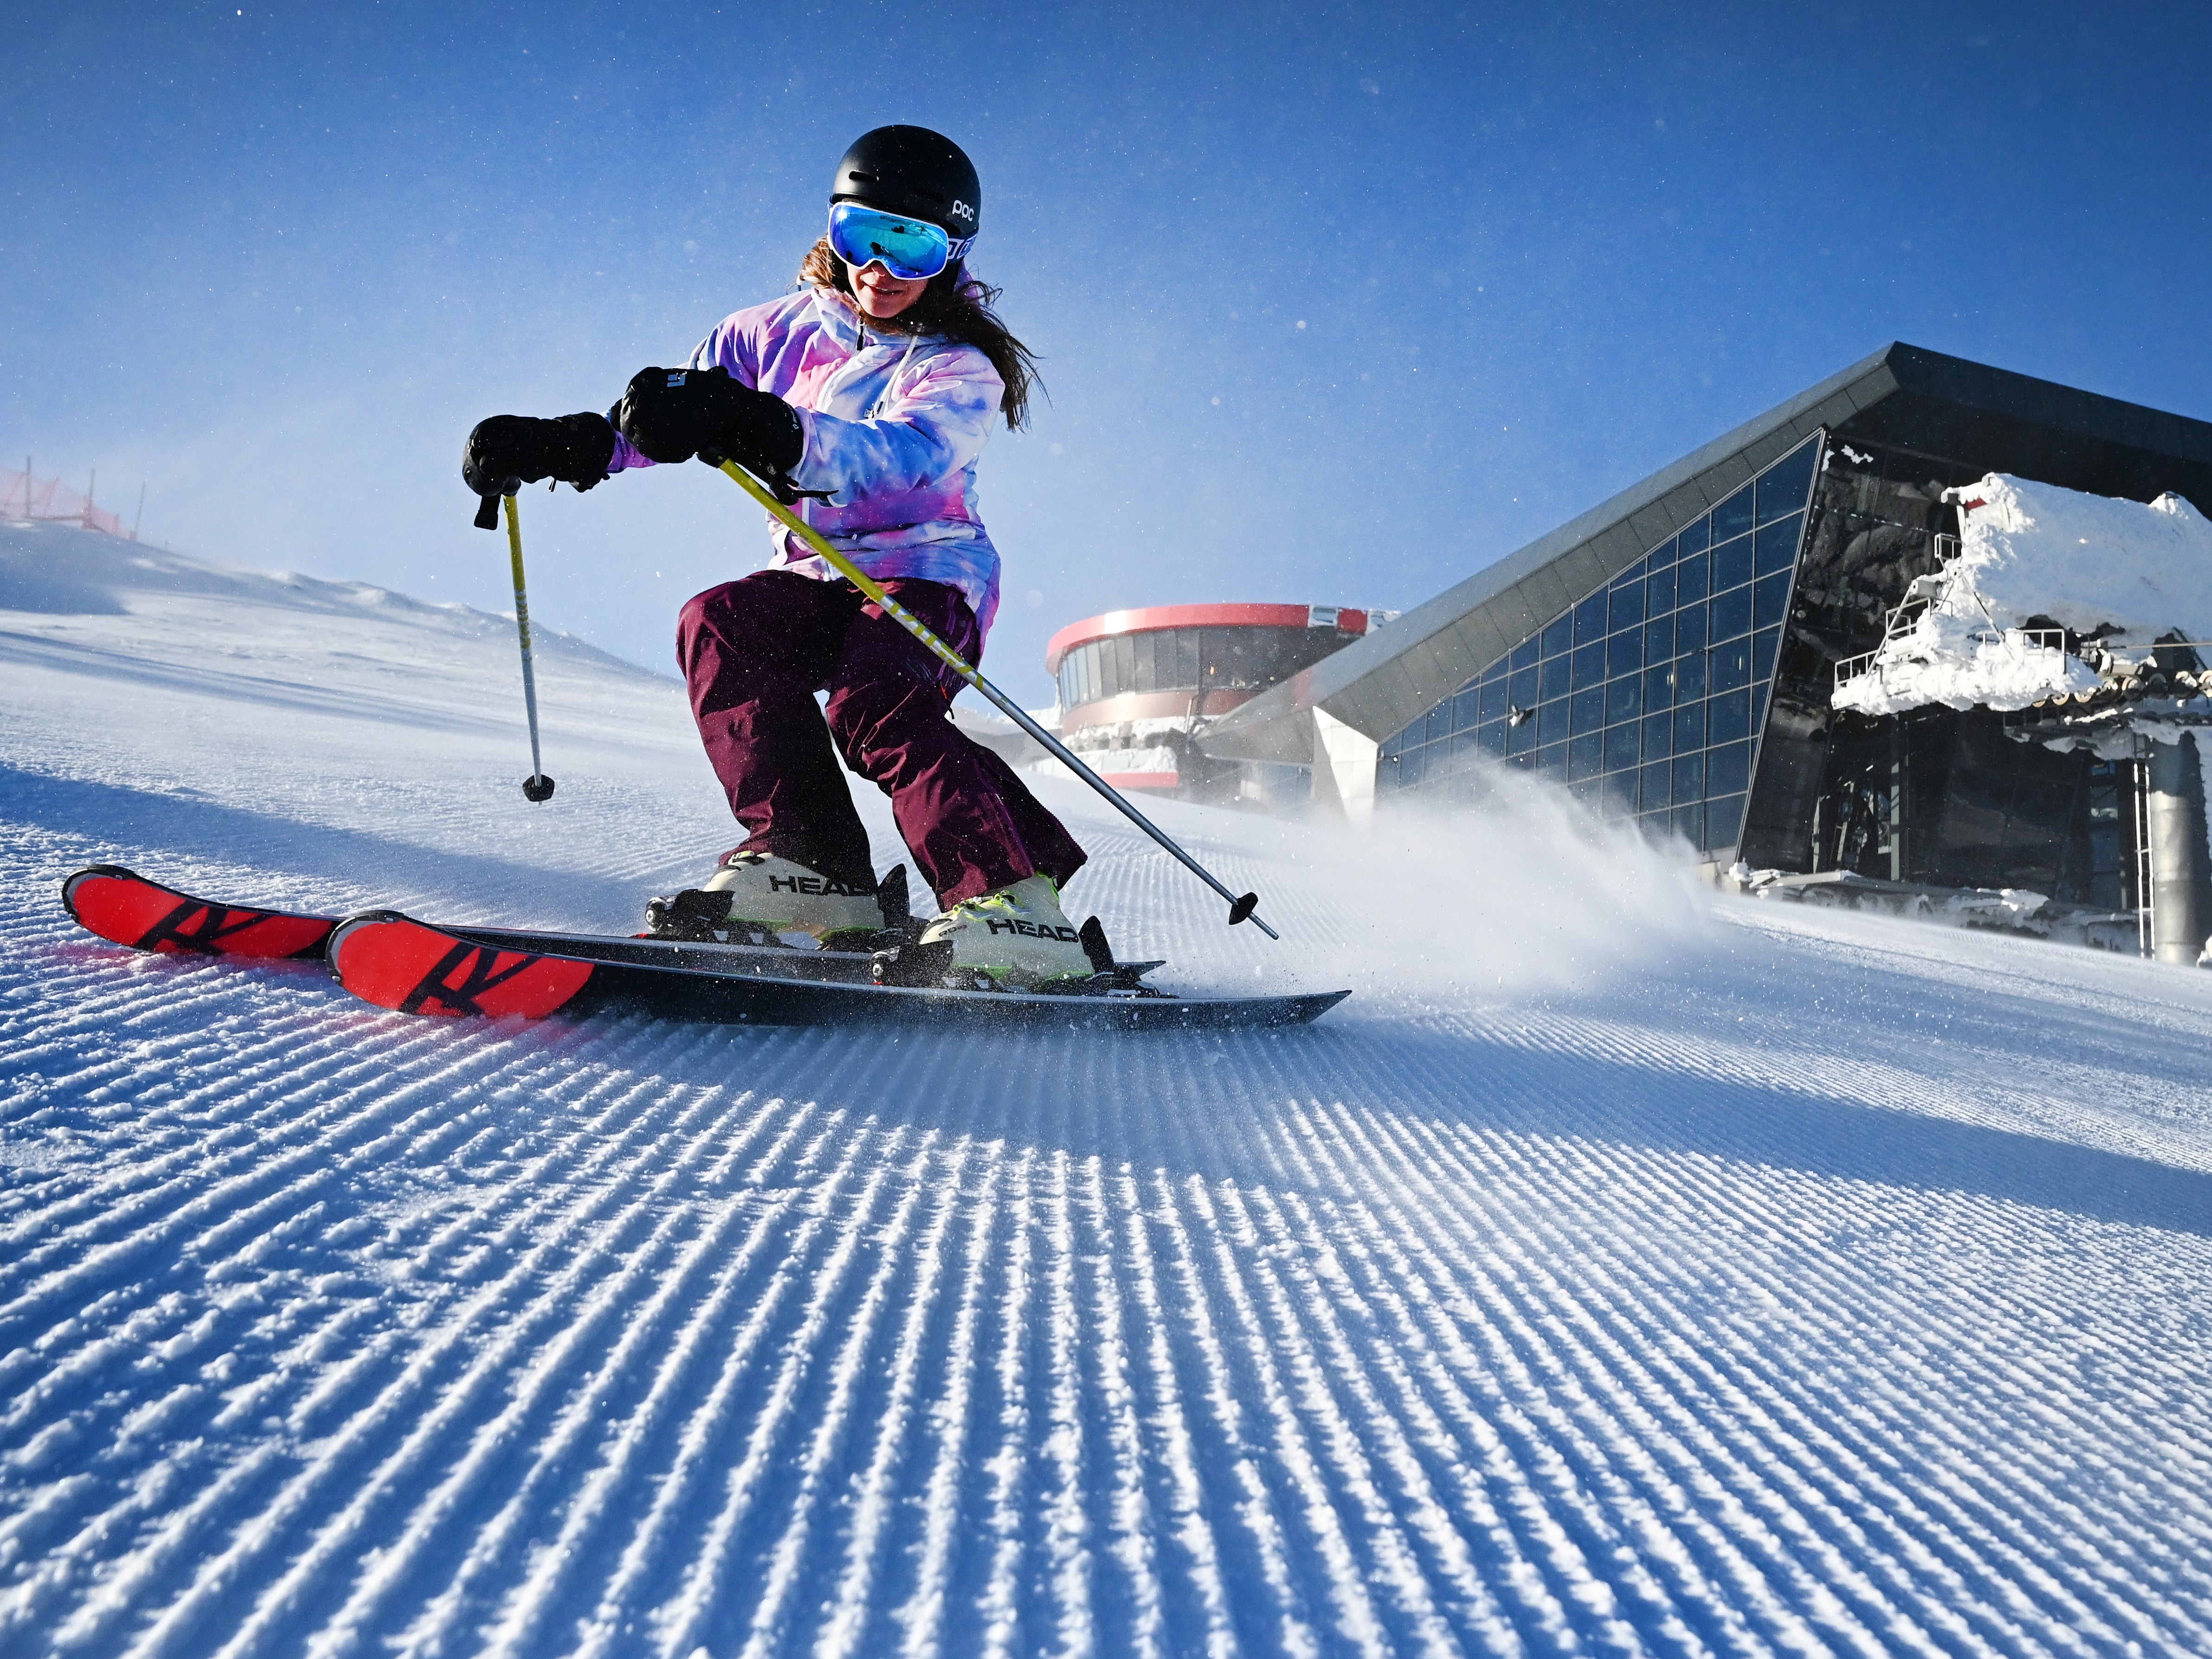 Jasná will keep most advanced downhill skiers entertained for the best part of a week